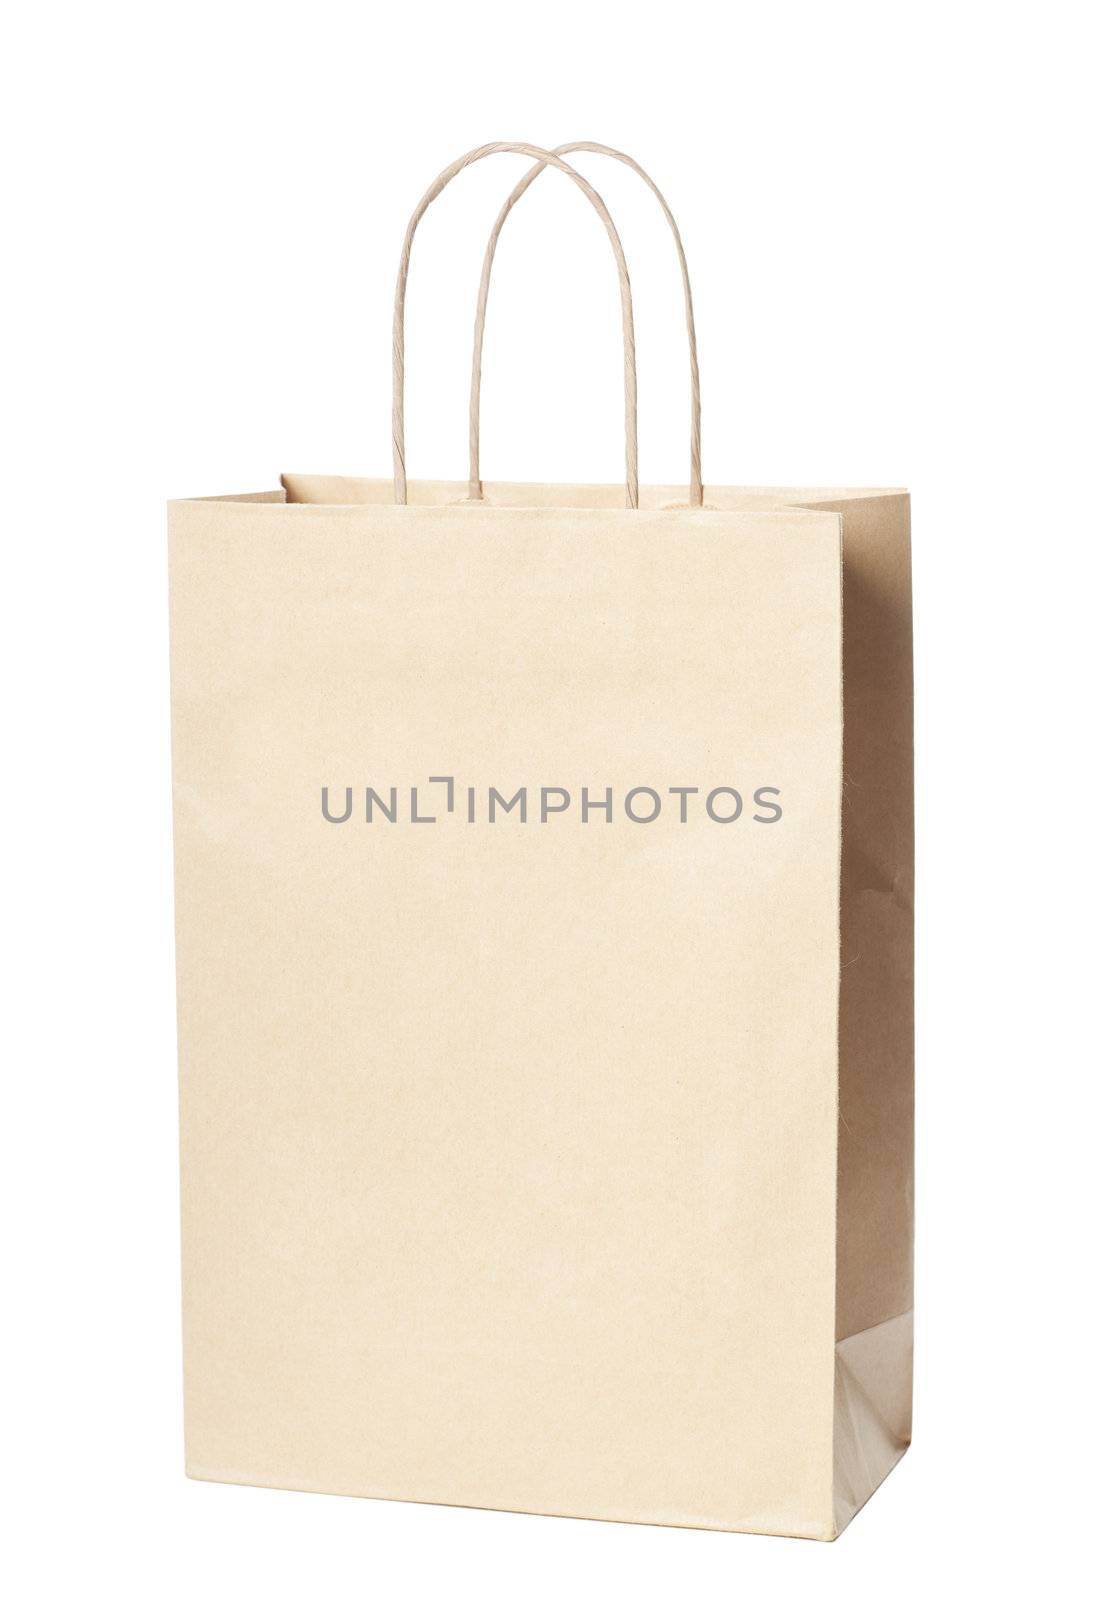 Single paper bag isolated over white background